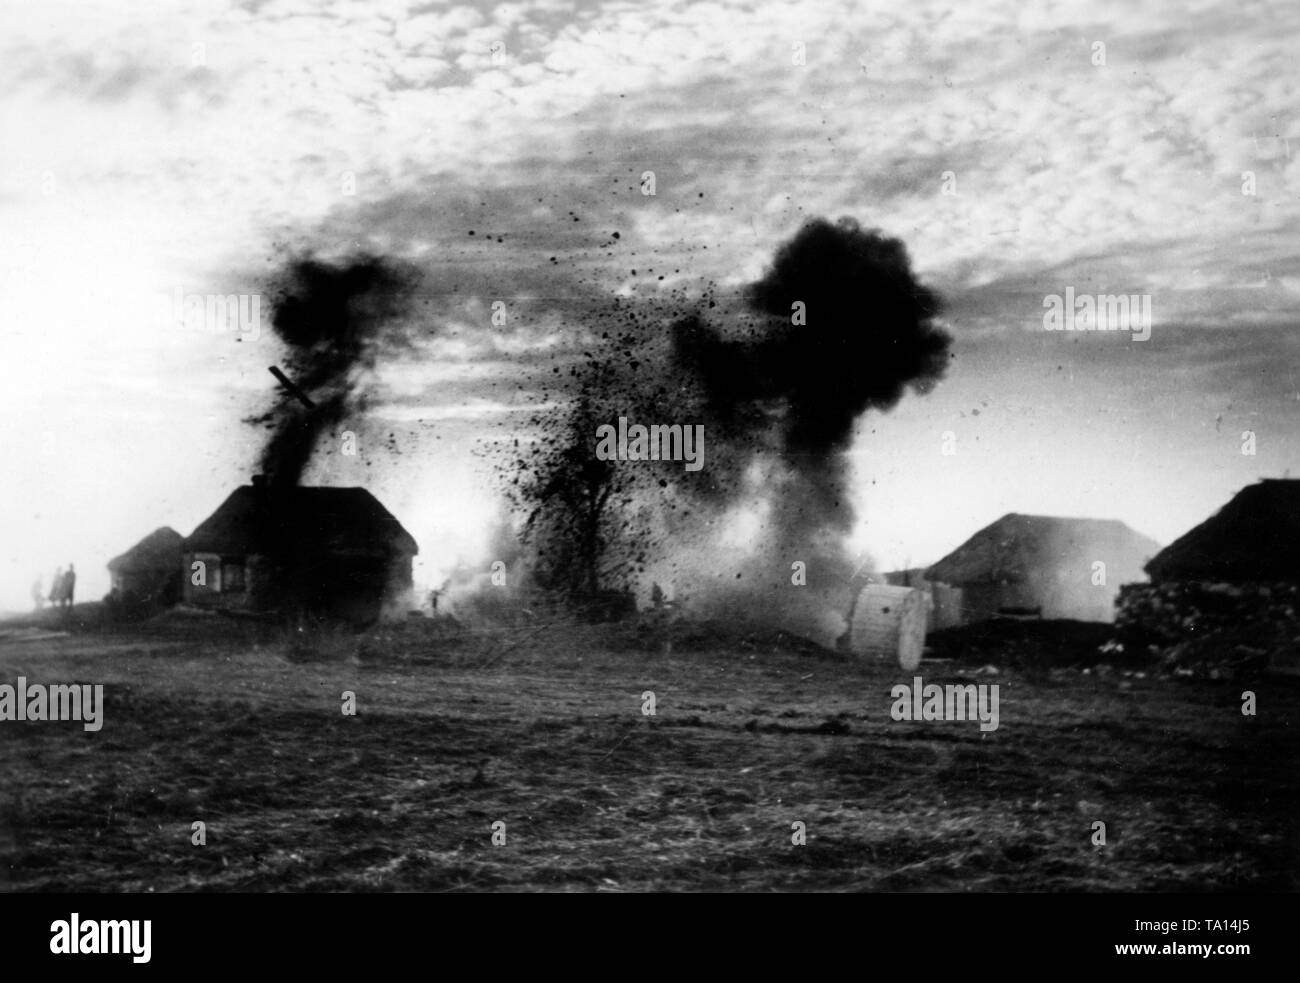 German soldiers are bombing a village in Russia. Stock Photo